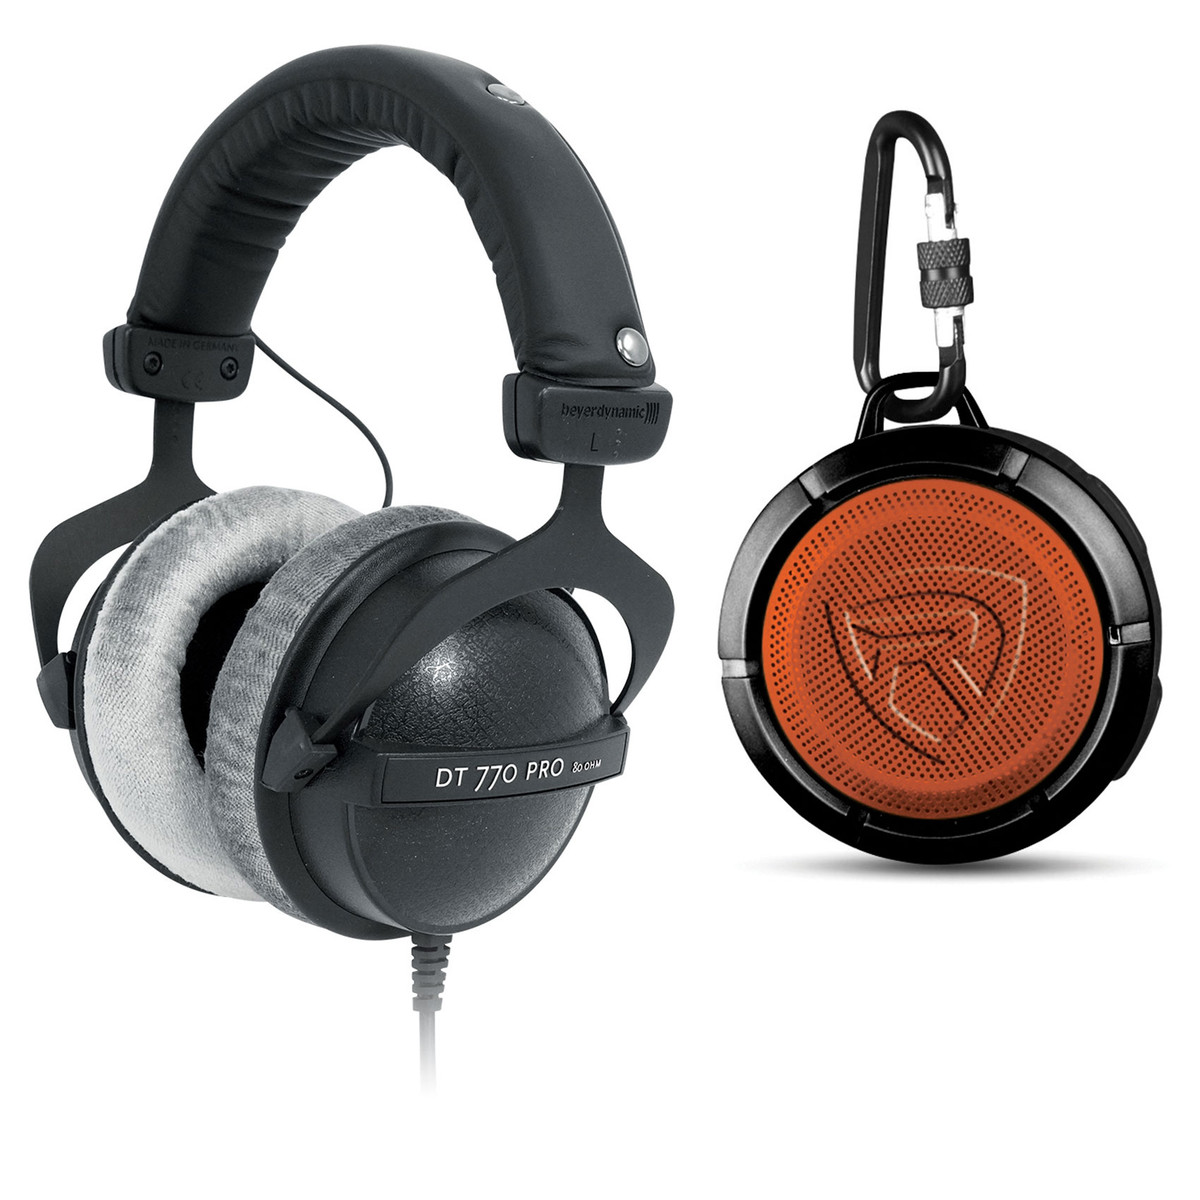 Beyerdynamic DT 770 Pro 80 Ohm Review - I like this one better